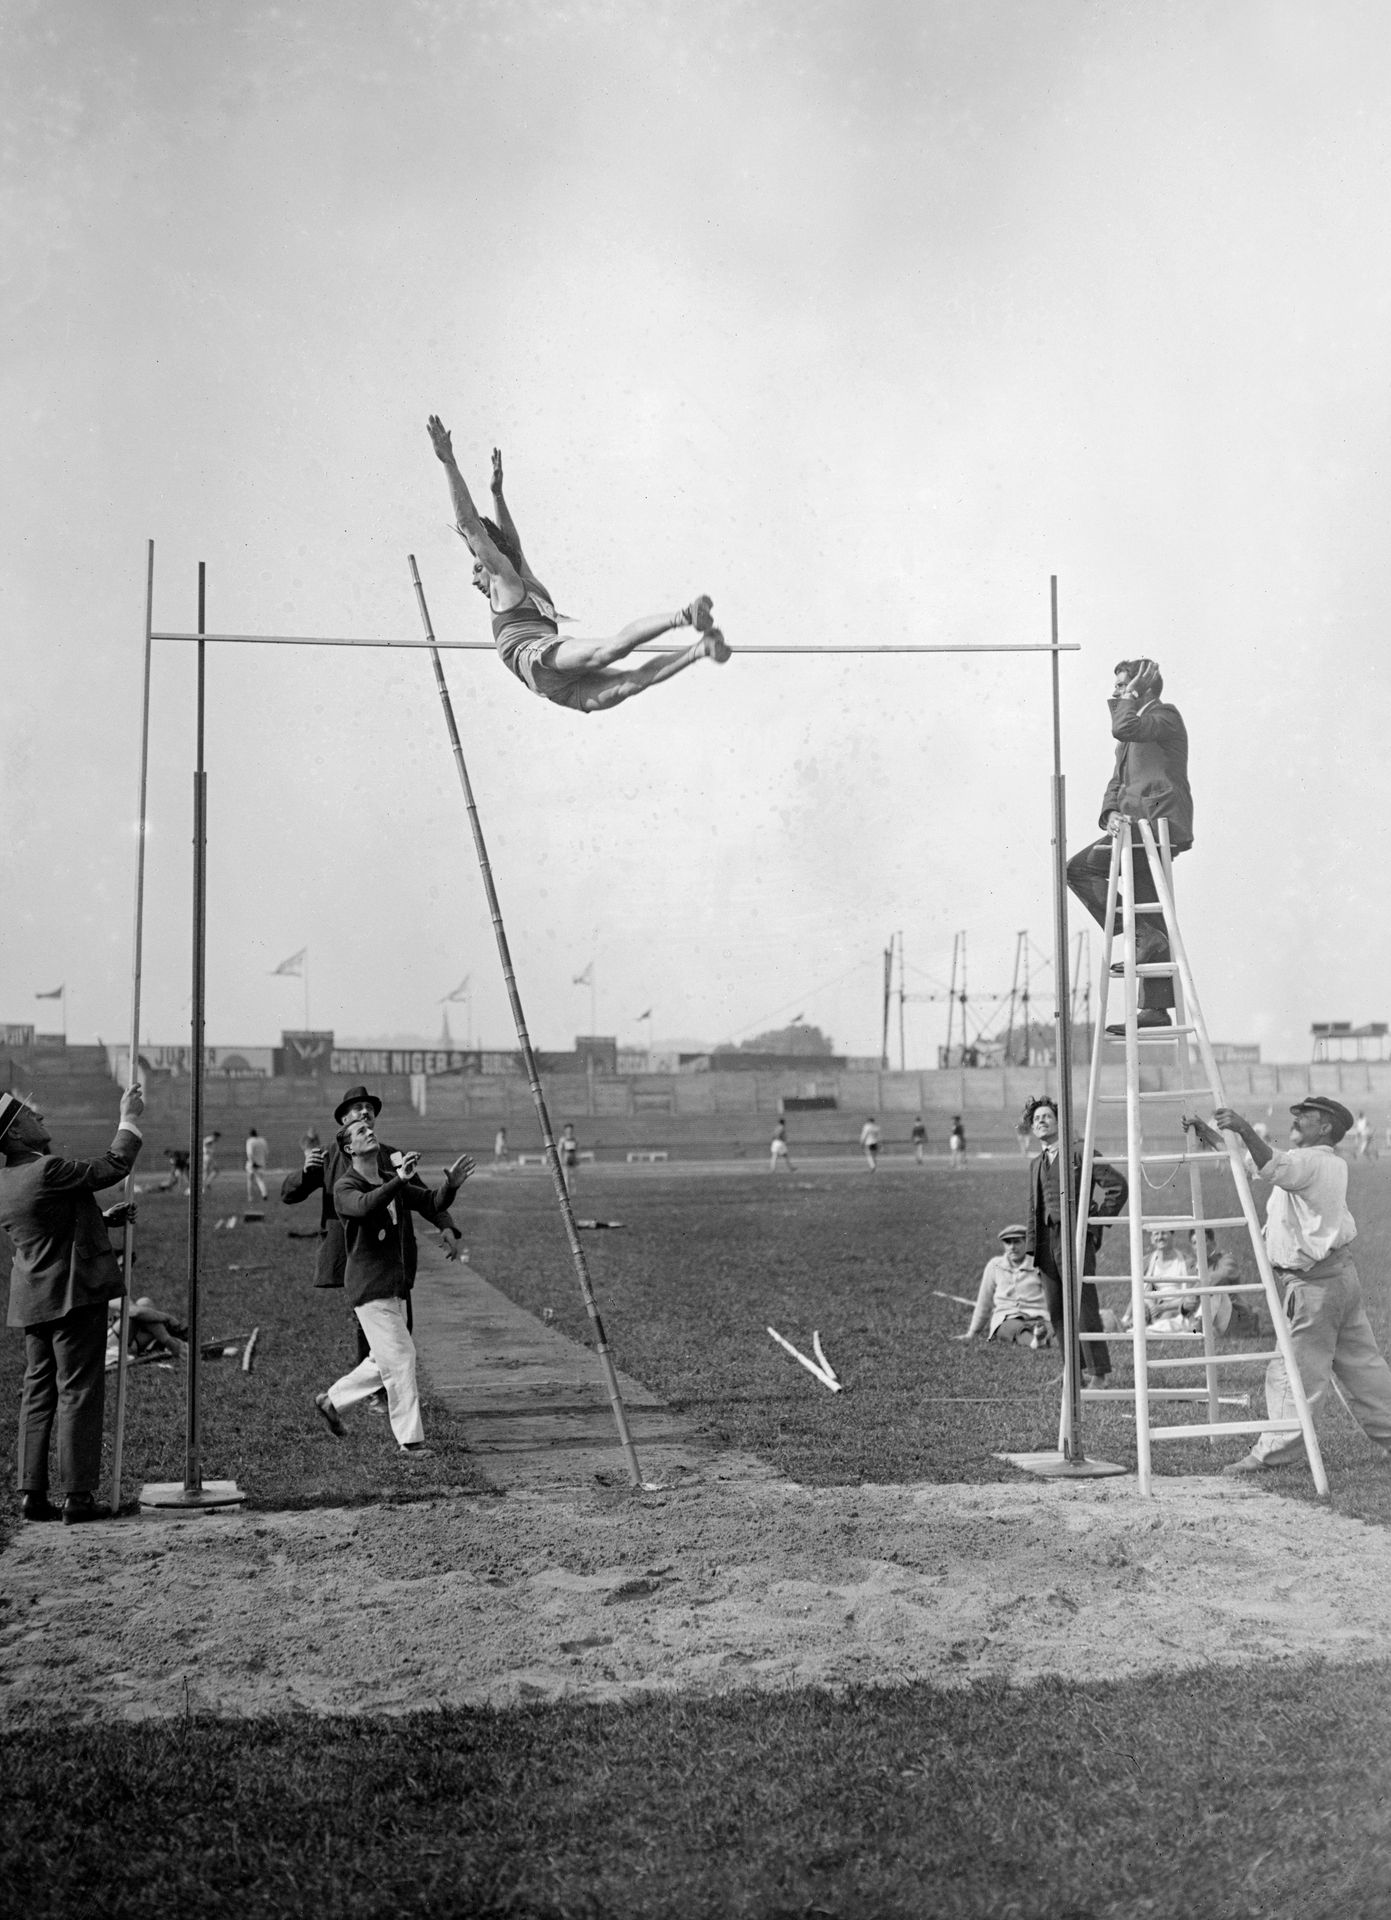 Null 
Colombes, Maurice Vautier, pole vaulting
Collections L'Équipe
22 June 1924&hellip;